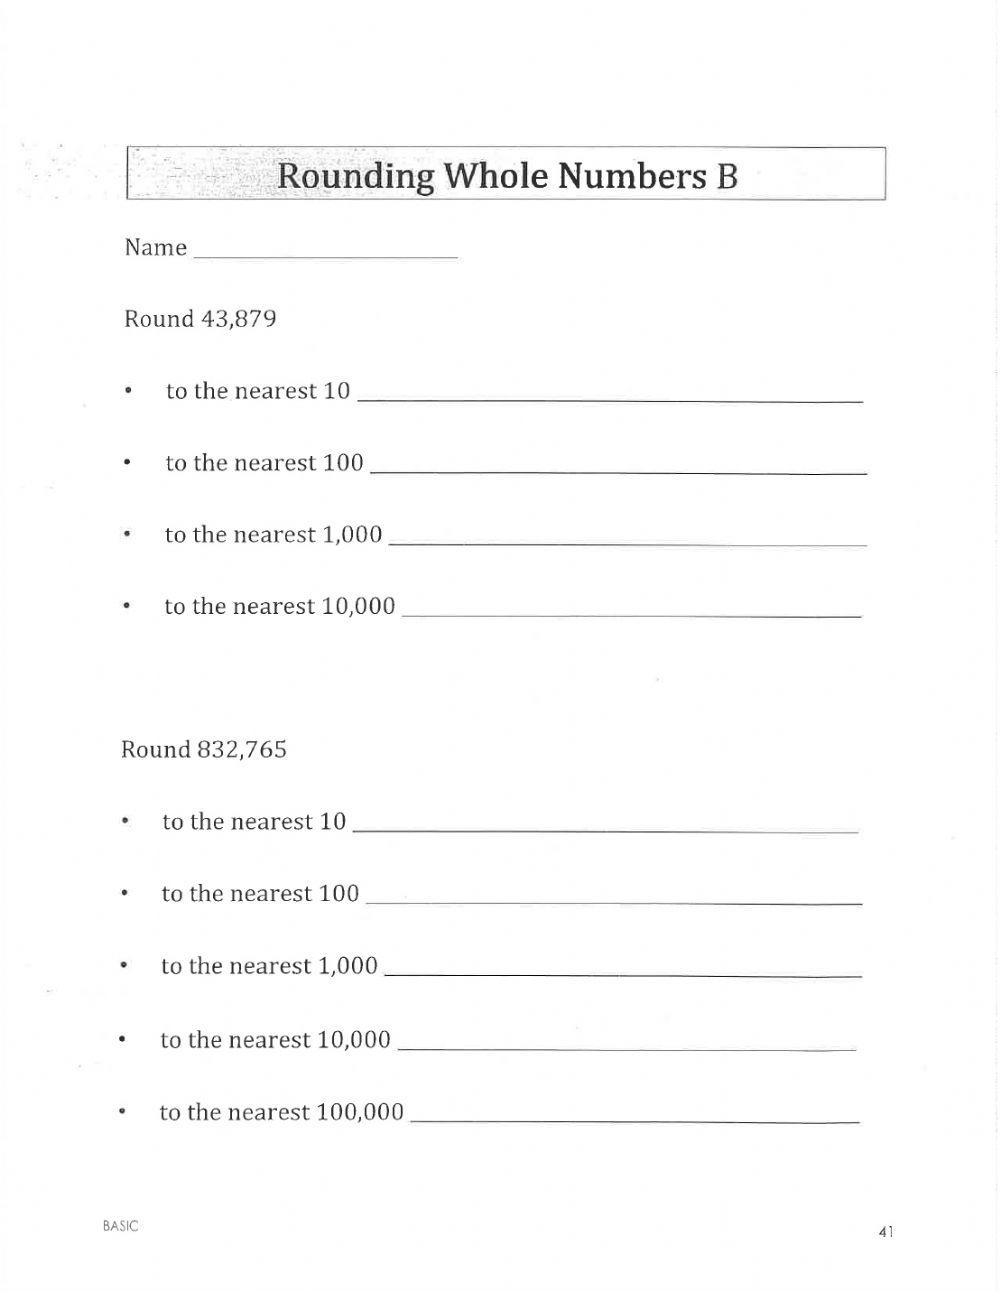 Rounding Whole Numbers B